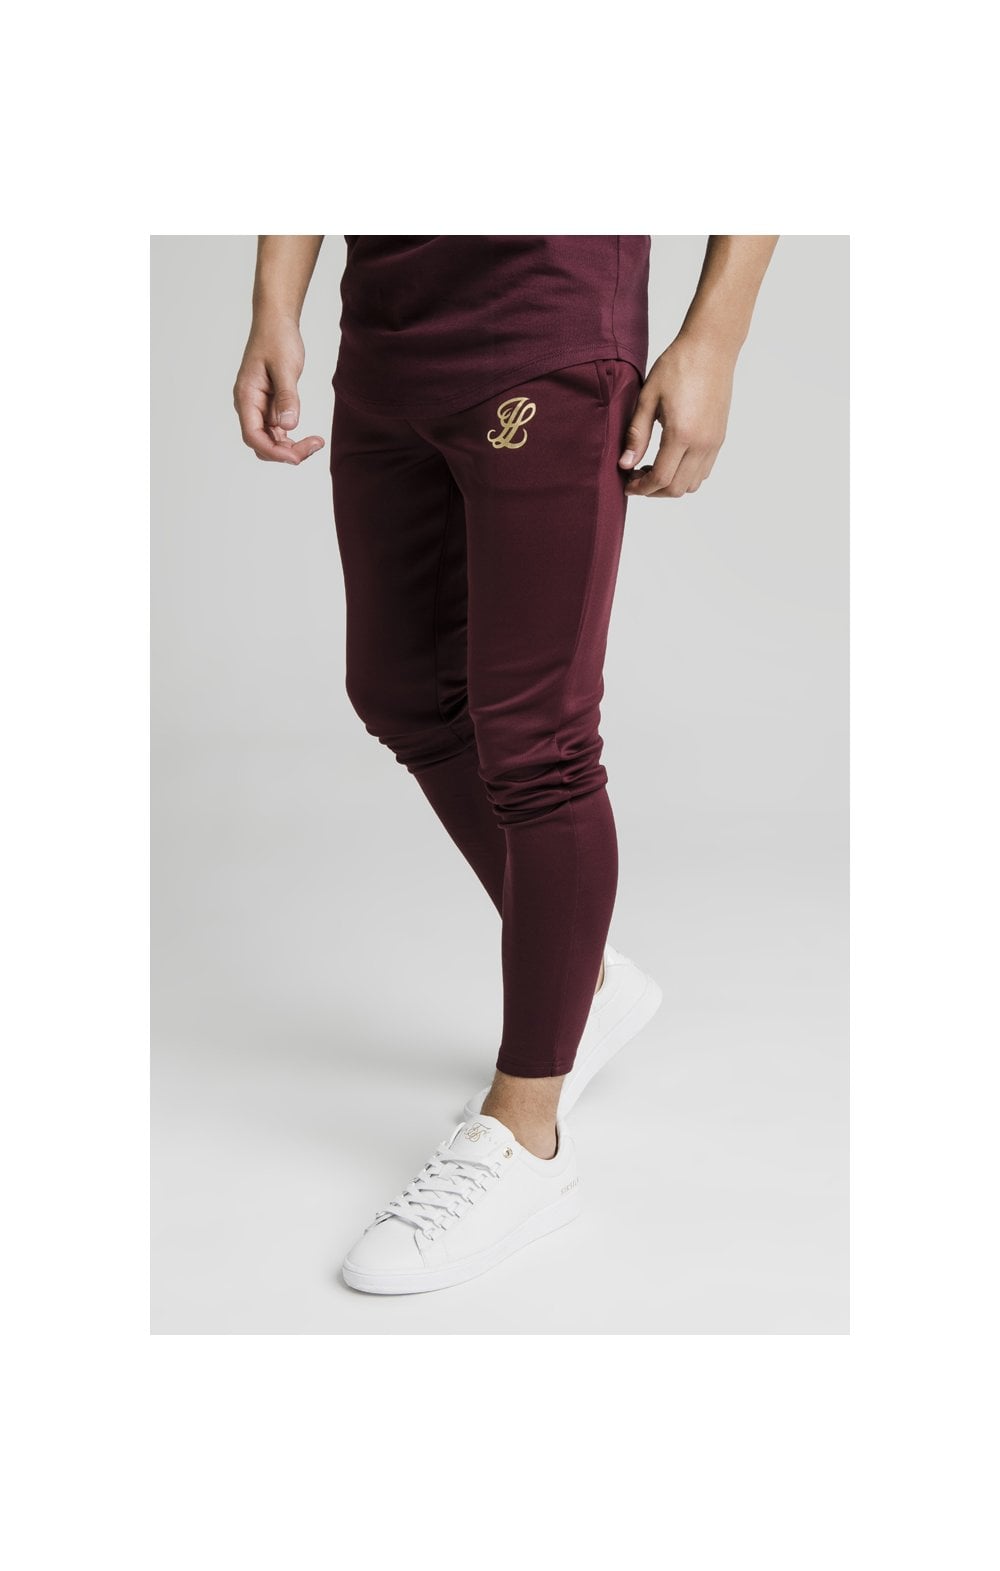 Load image into Gallery viewer, Illusive London Agility Track Pants - Burgundy